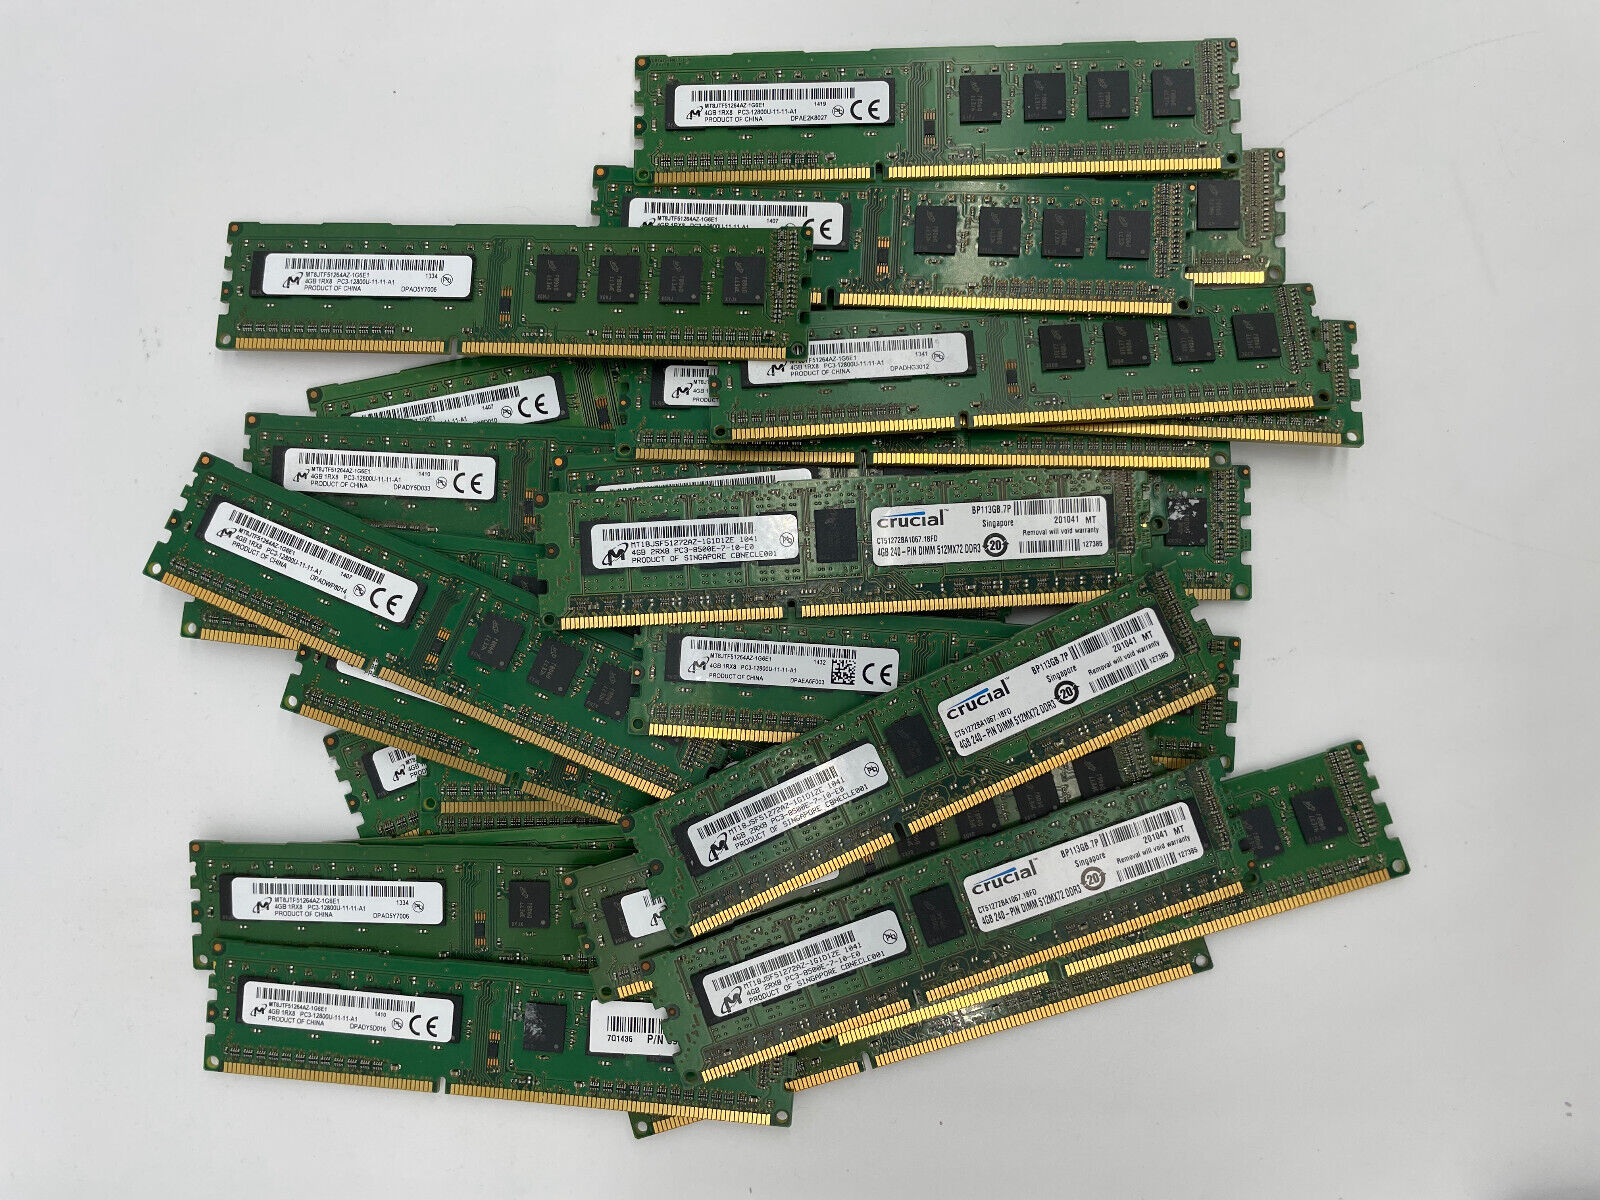 Lot of 29 pcs – Assorted Memory (RAM) – Micron 4GB & other